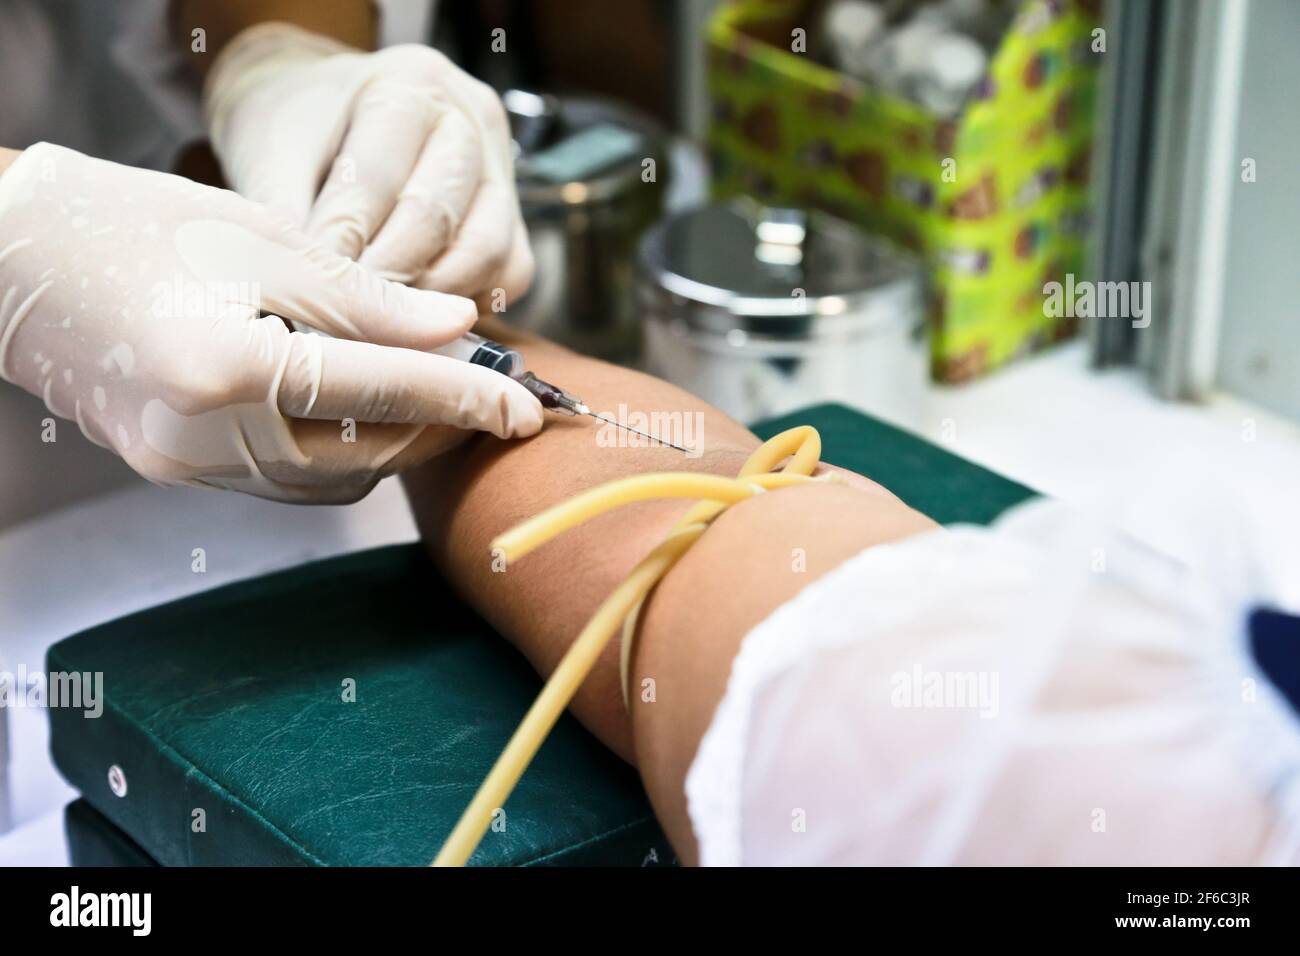 Doctor or nurse hands in medical white gloves using needle syringe drawing blood sample from patient arm in hospital. Stock Photo